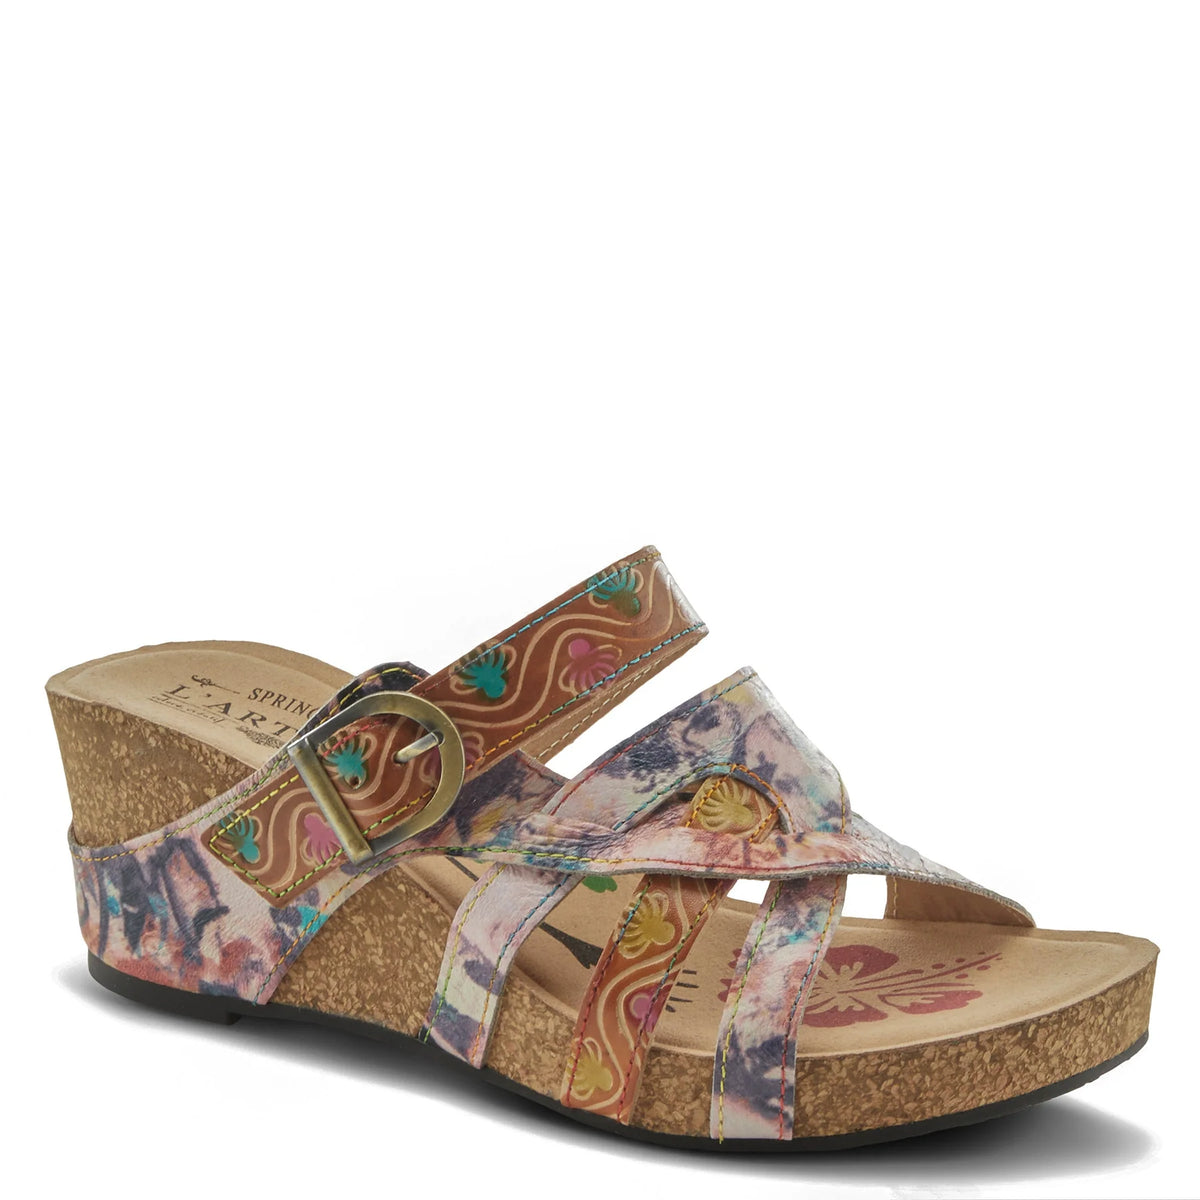 L`Artiste Style: BAOCIRE  French inspired multi strapped slide sandal with beautiful hand-painted and embossed florals and swirls on premium leather. Featuring an adjustable top strap with an antique brass buckle, asymmetrical manmade intertwined floral rainbow stitched straps, on an all-day comfortable super padded footbed and cork wrapped wedge.